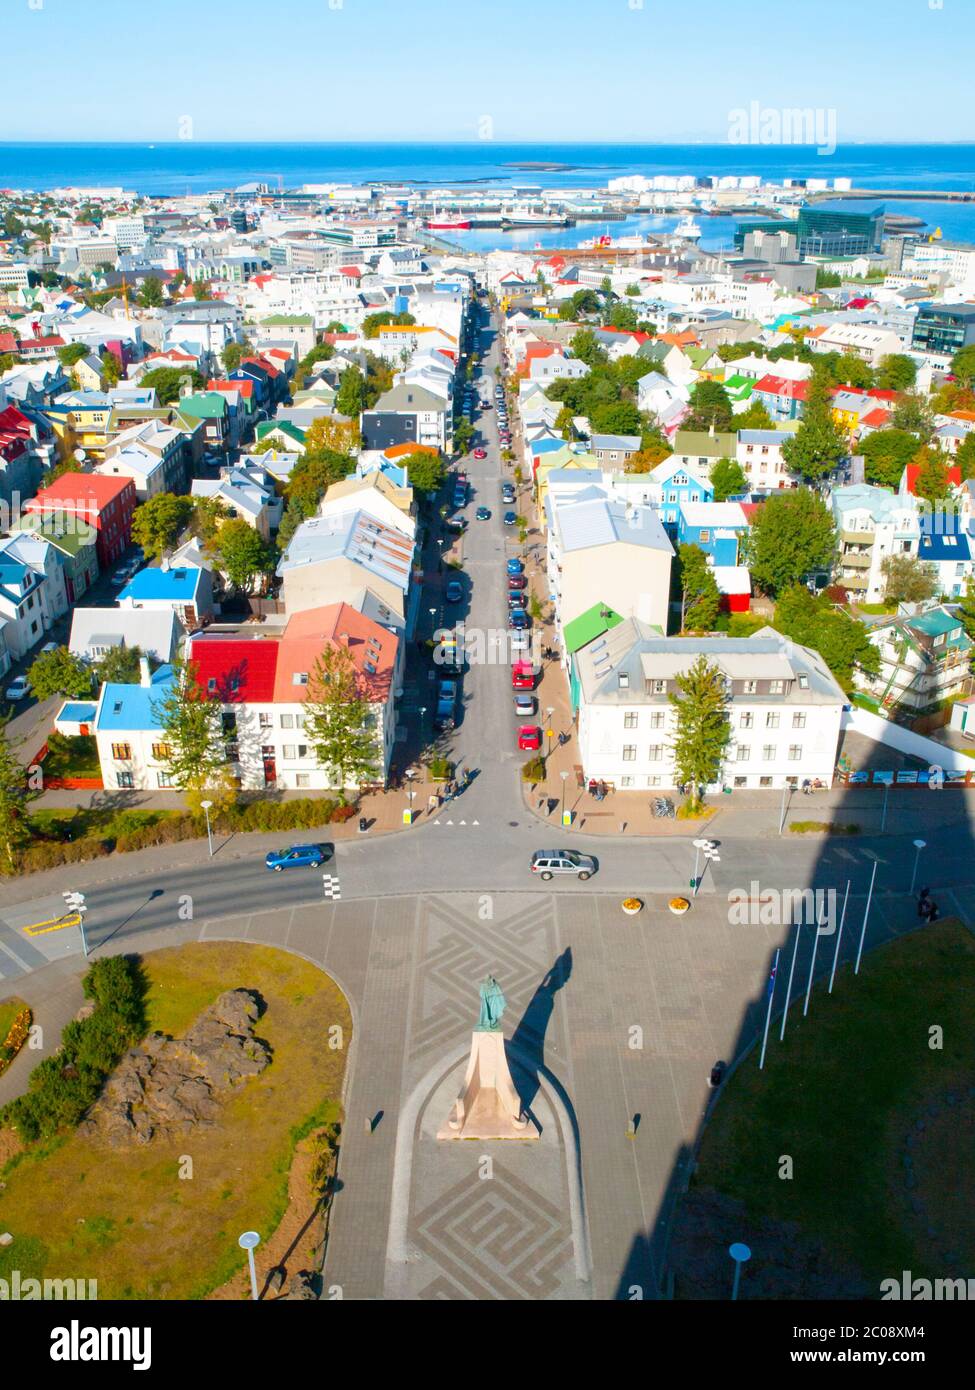 Aerial view of Reykjavik from the top of the Hallgrimskirkja church, Iceland. Stock Photo